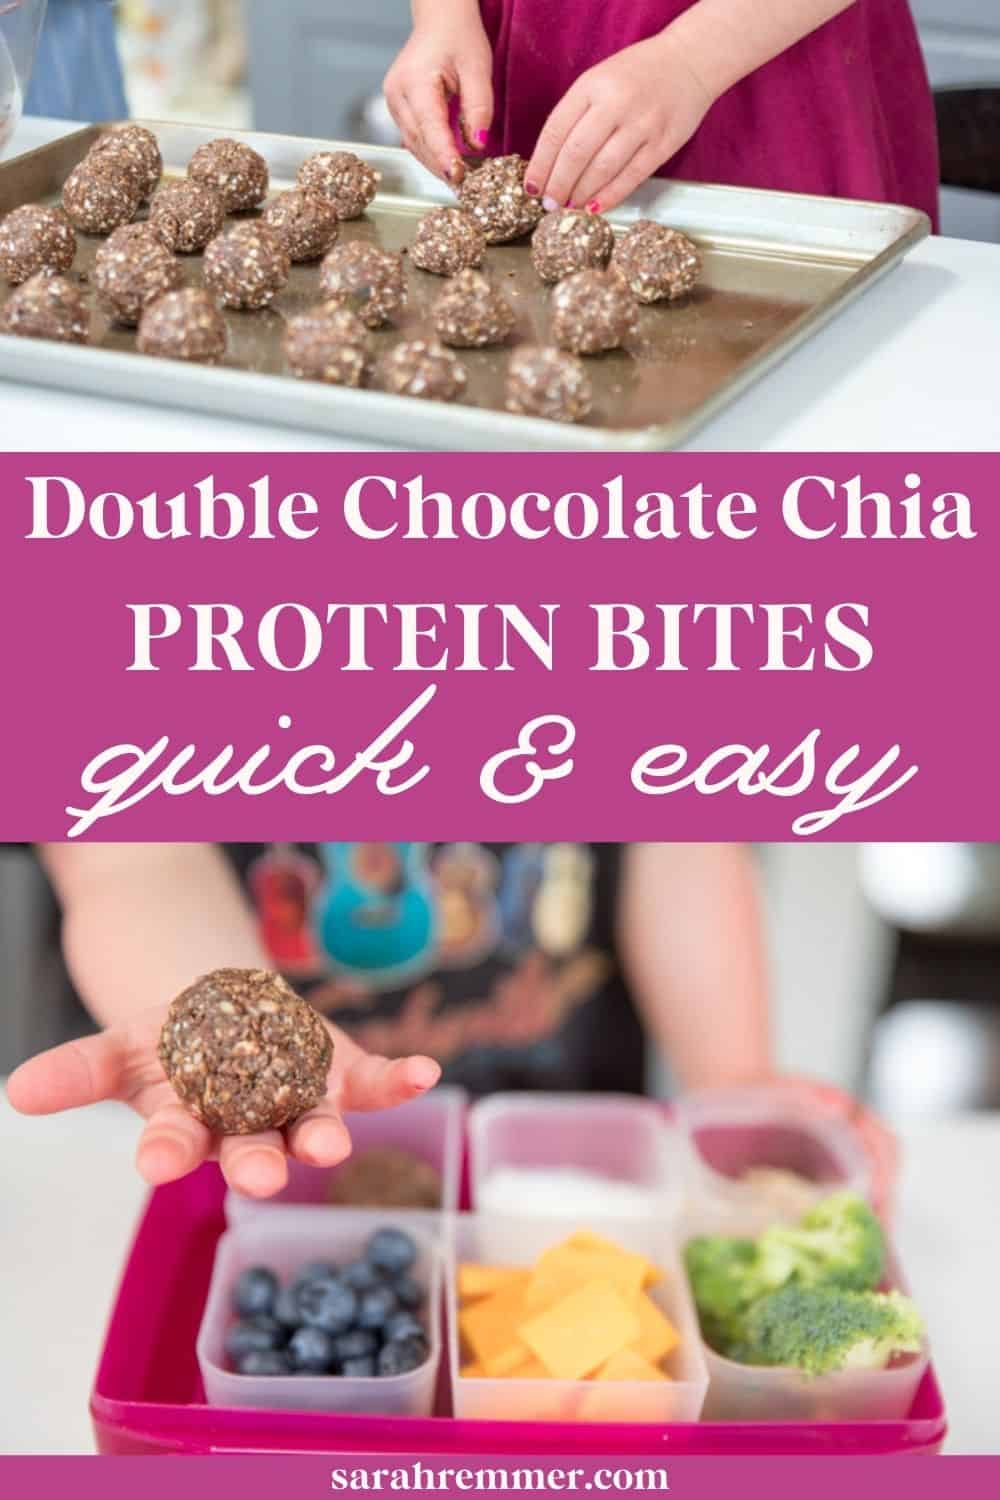 I've been on a mission lately to find healthy and tasty snack recipes to add some variety to my son's lunchbox. Enter these double chocolate chia protein bites! They're kid-approved and school safe.